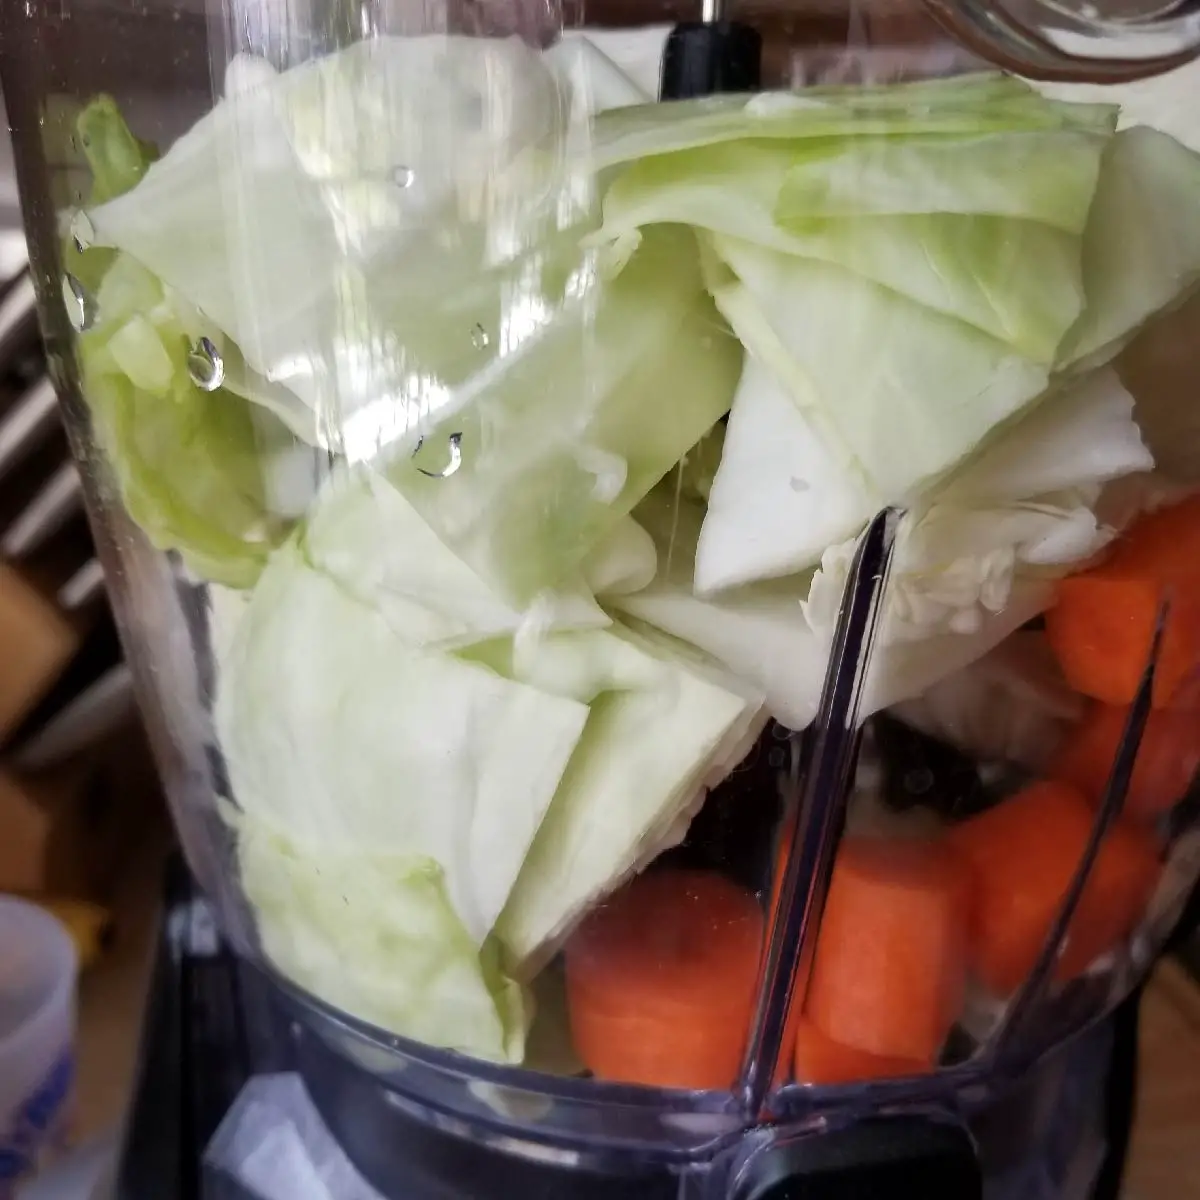 Cabbage pieces and carrot chunks in the food processor.